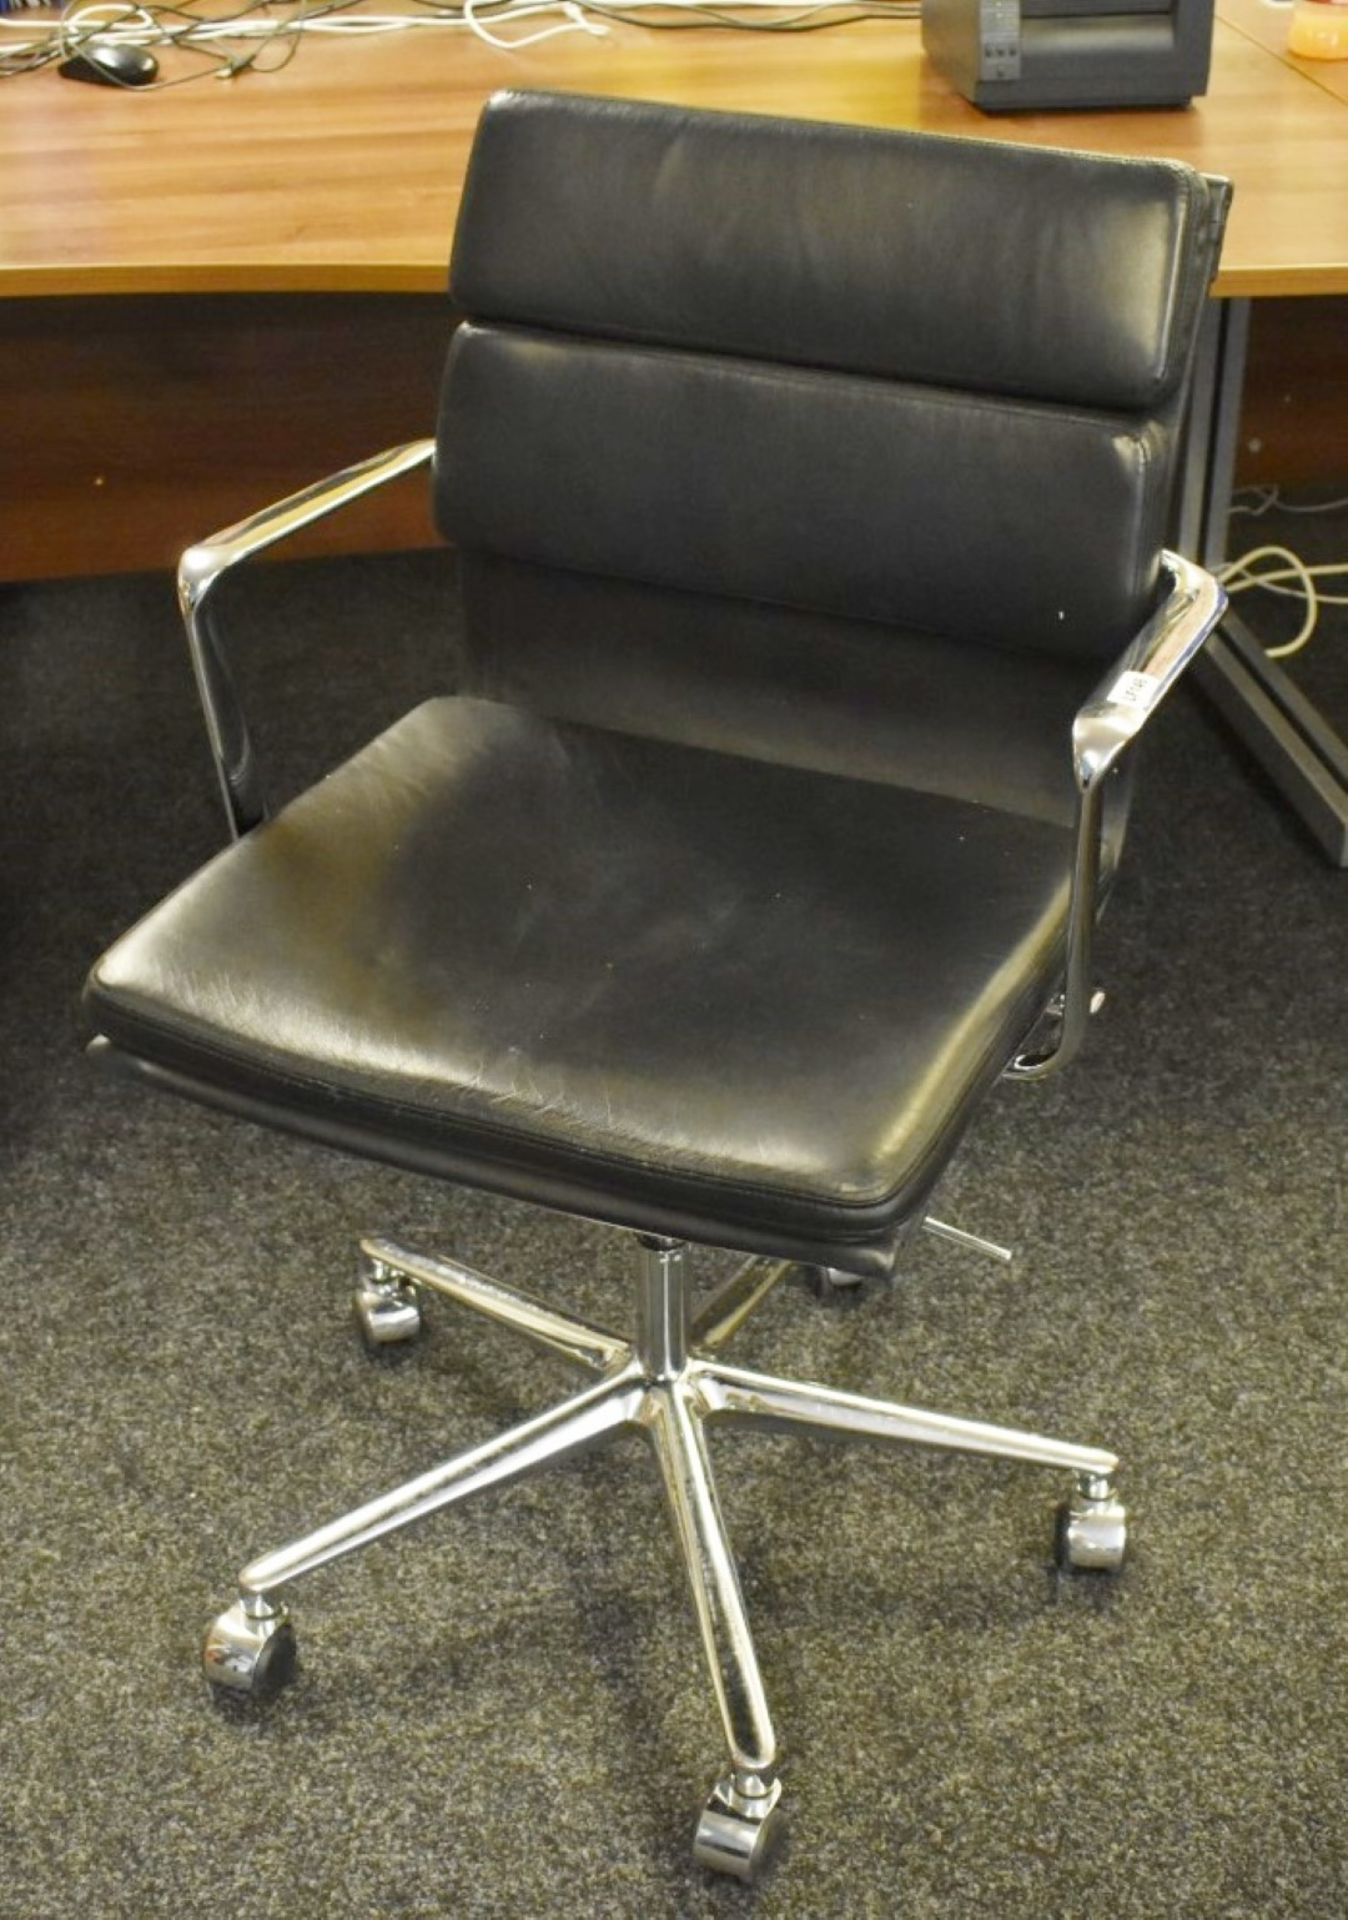 1 x Eames Inspired Office Chair - Swivel Office Chair Upholstered in Black Leather - Image 2 of 7